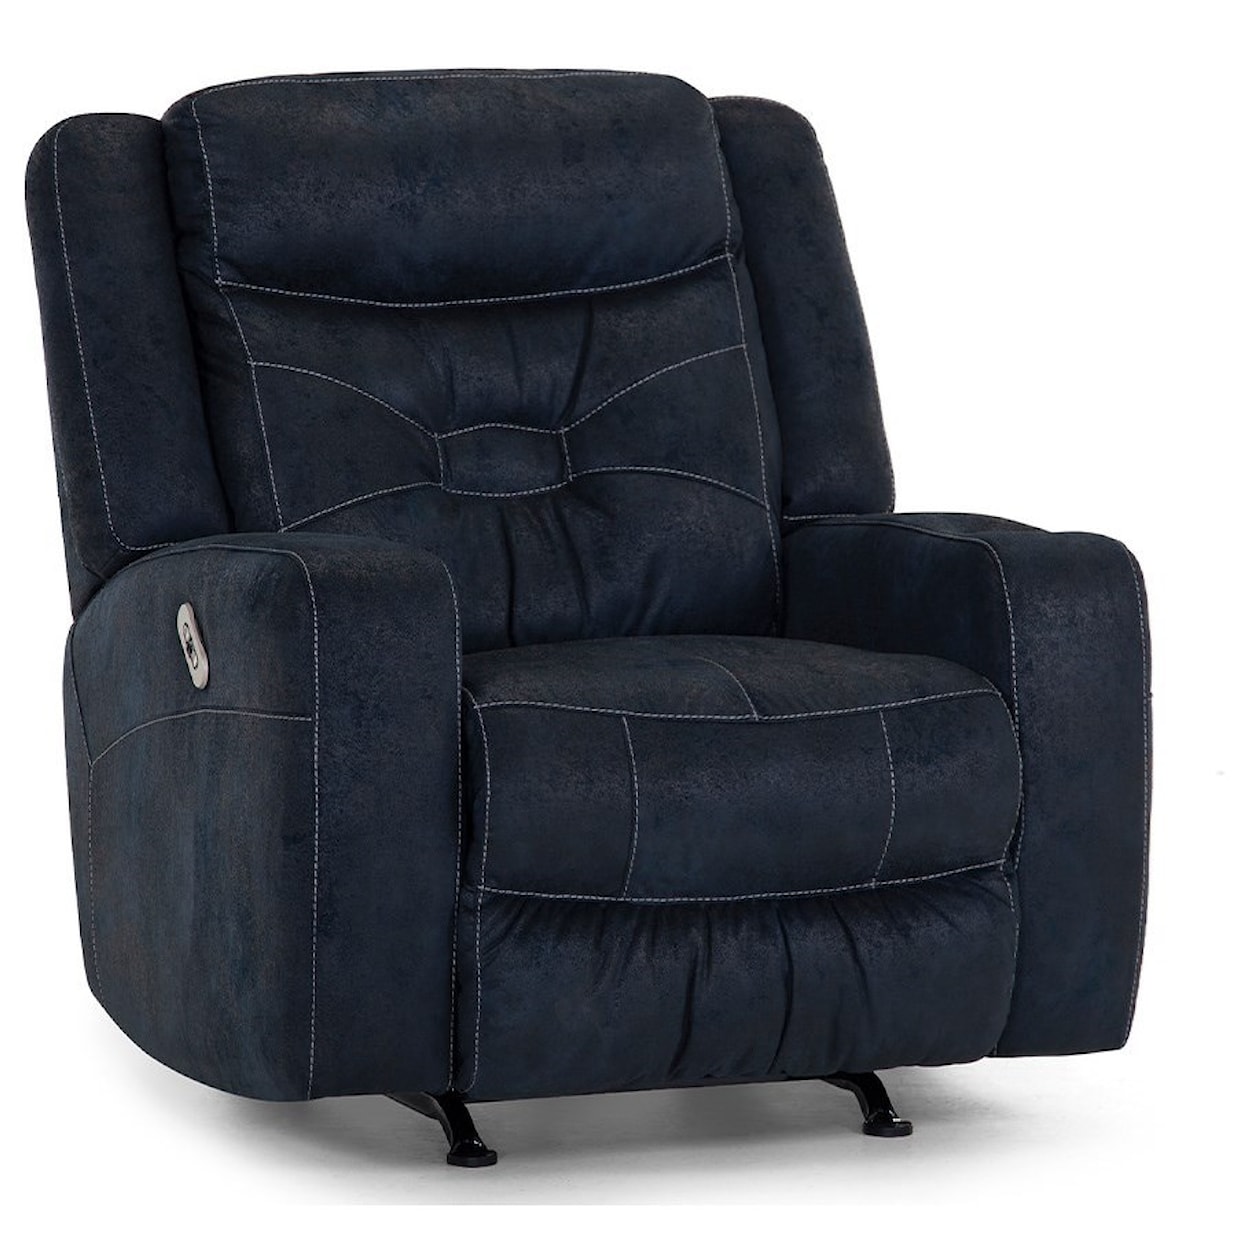 Franklin Bedford Dual Power Rocker Recliner with Cupholder